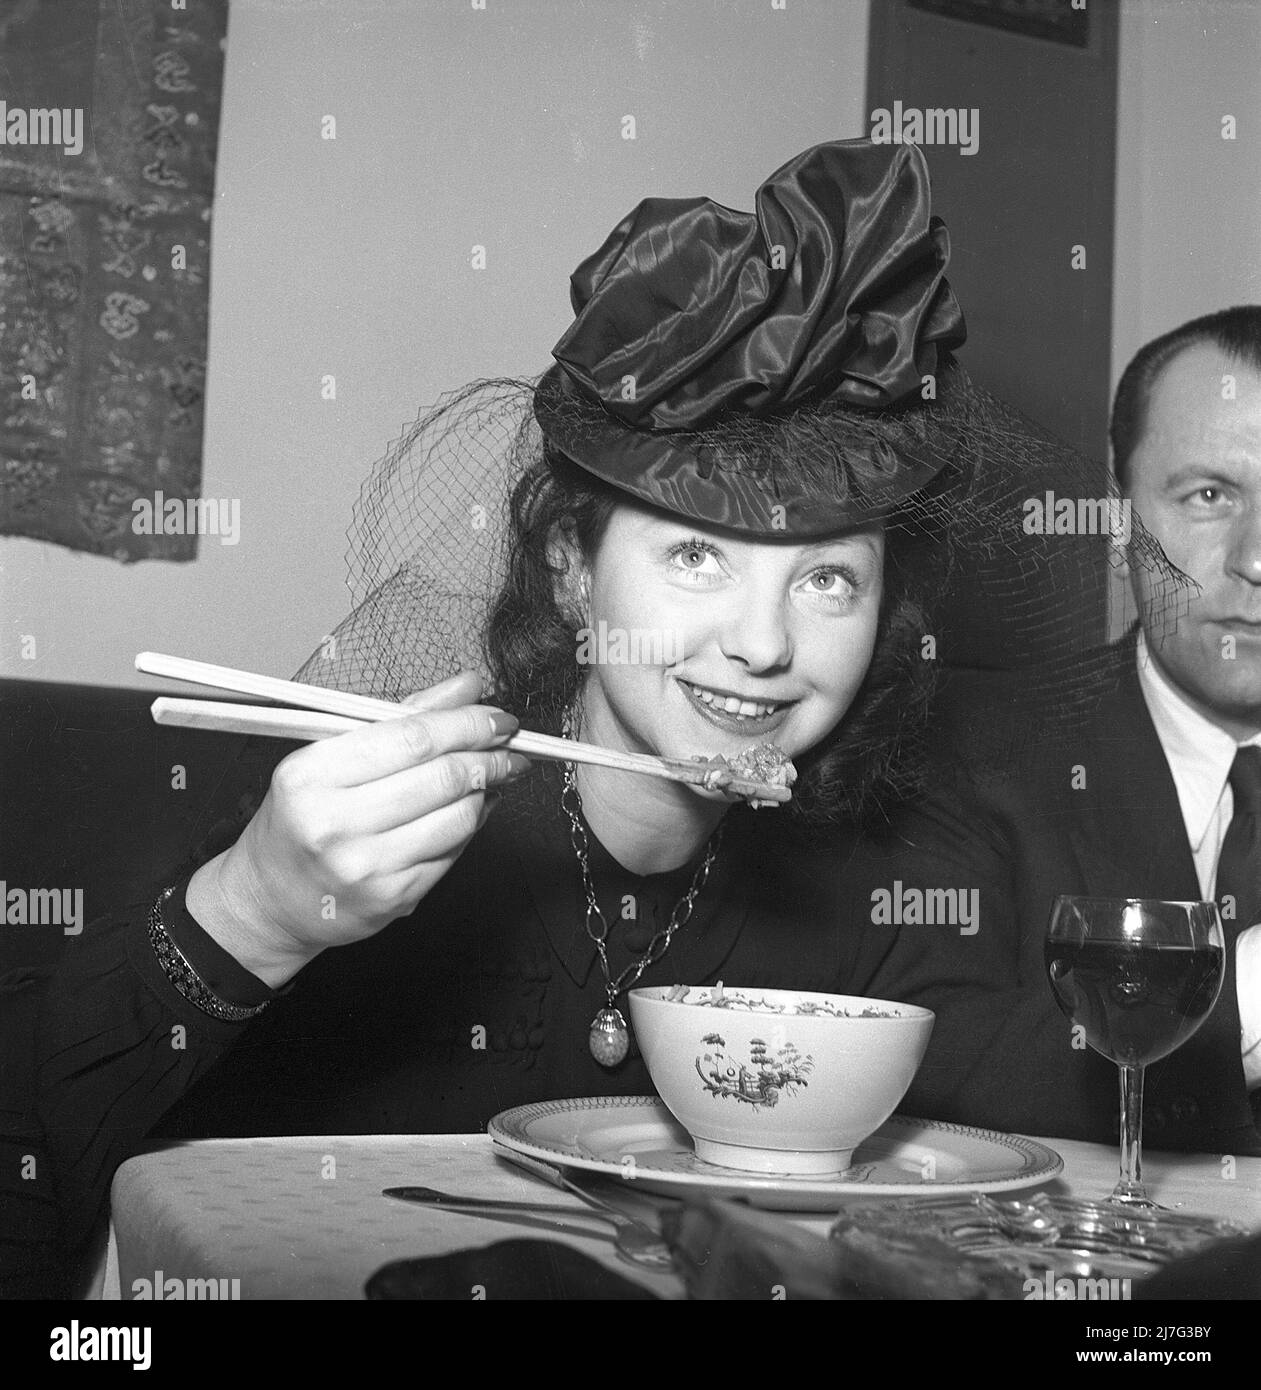 Chinese food being served for the first time ever in a swedish restaurant 1944. It is actress Marguerite Viby who looks as if she can handle the chopsticks and enjoys the novelty food. The restaurant Berns in Stockholm has four chinese chefs cooking traditional chinese cuisine for the first time in a swedish restaraunt. Sweden Kristoffersson G53-5 Stock Photo